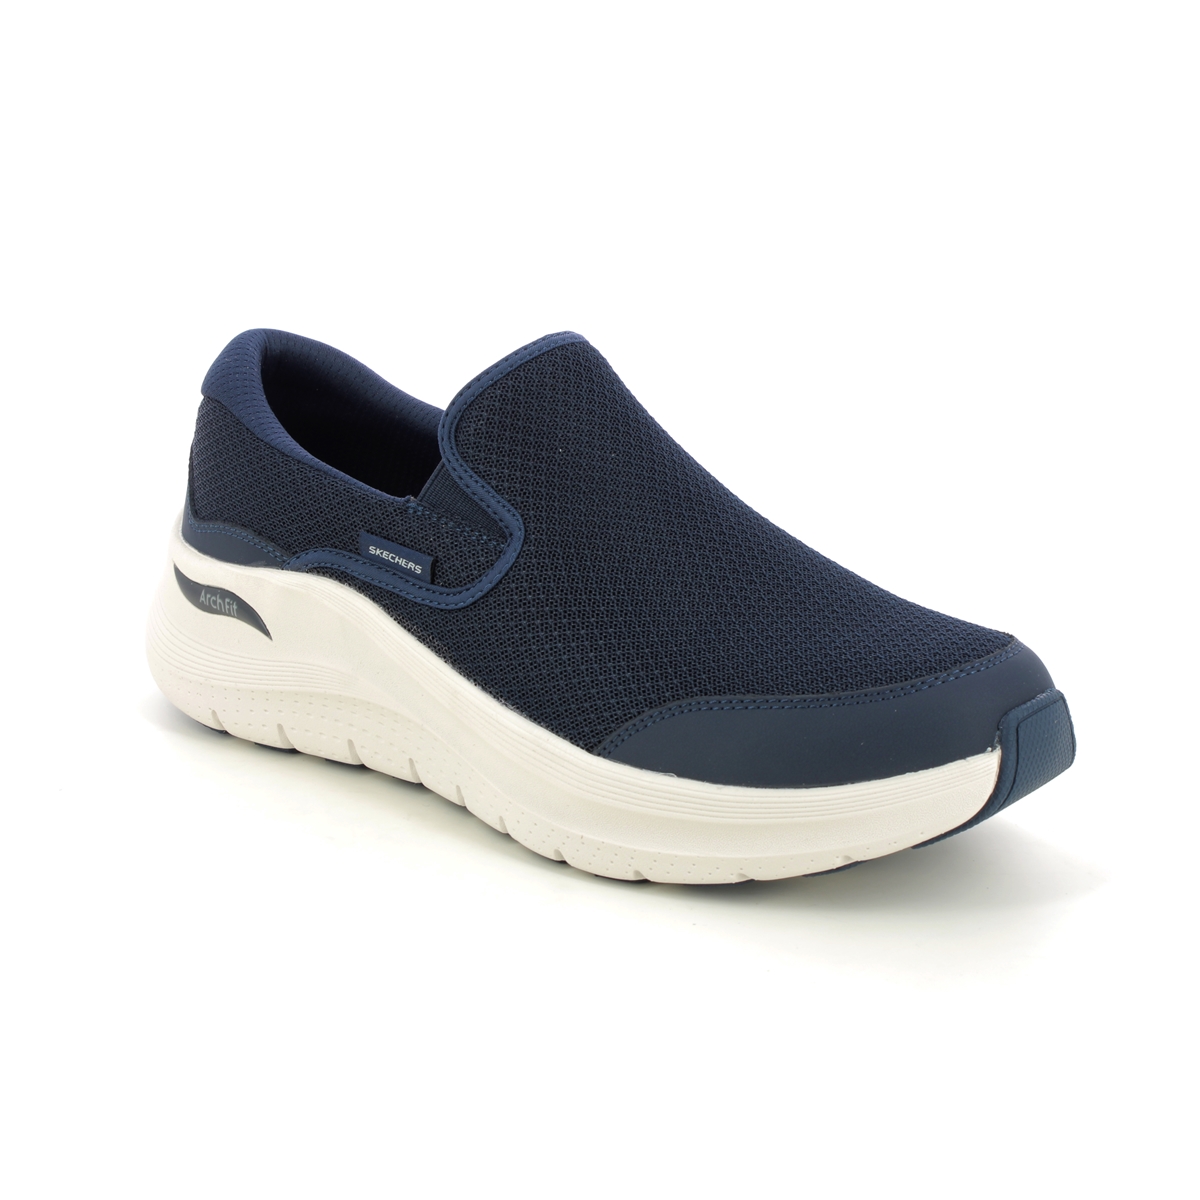 Skechers Arch Fit 2 Slip NVY Navy Mens trainers 232706 in a Plain Leather and Textile in Size 8